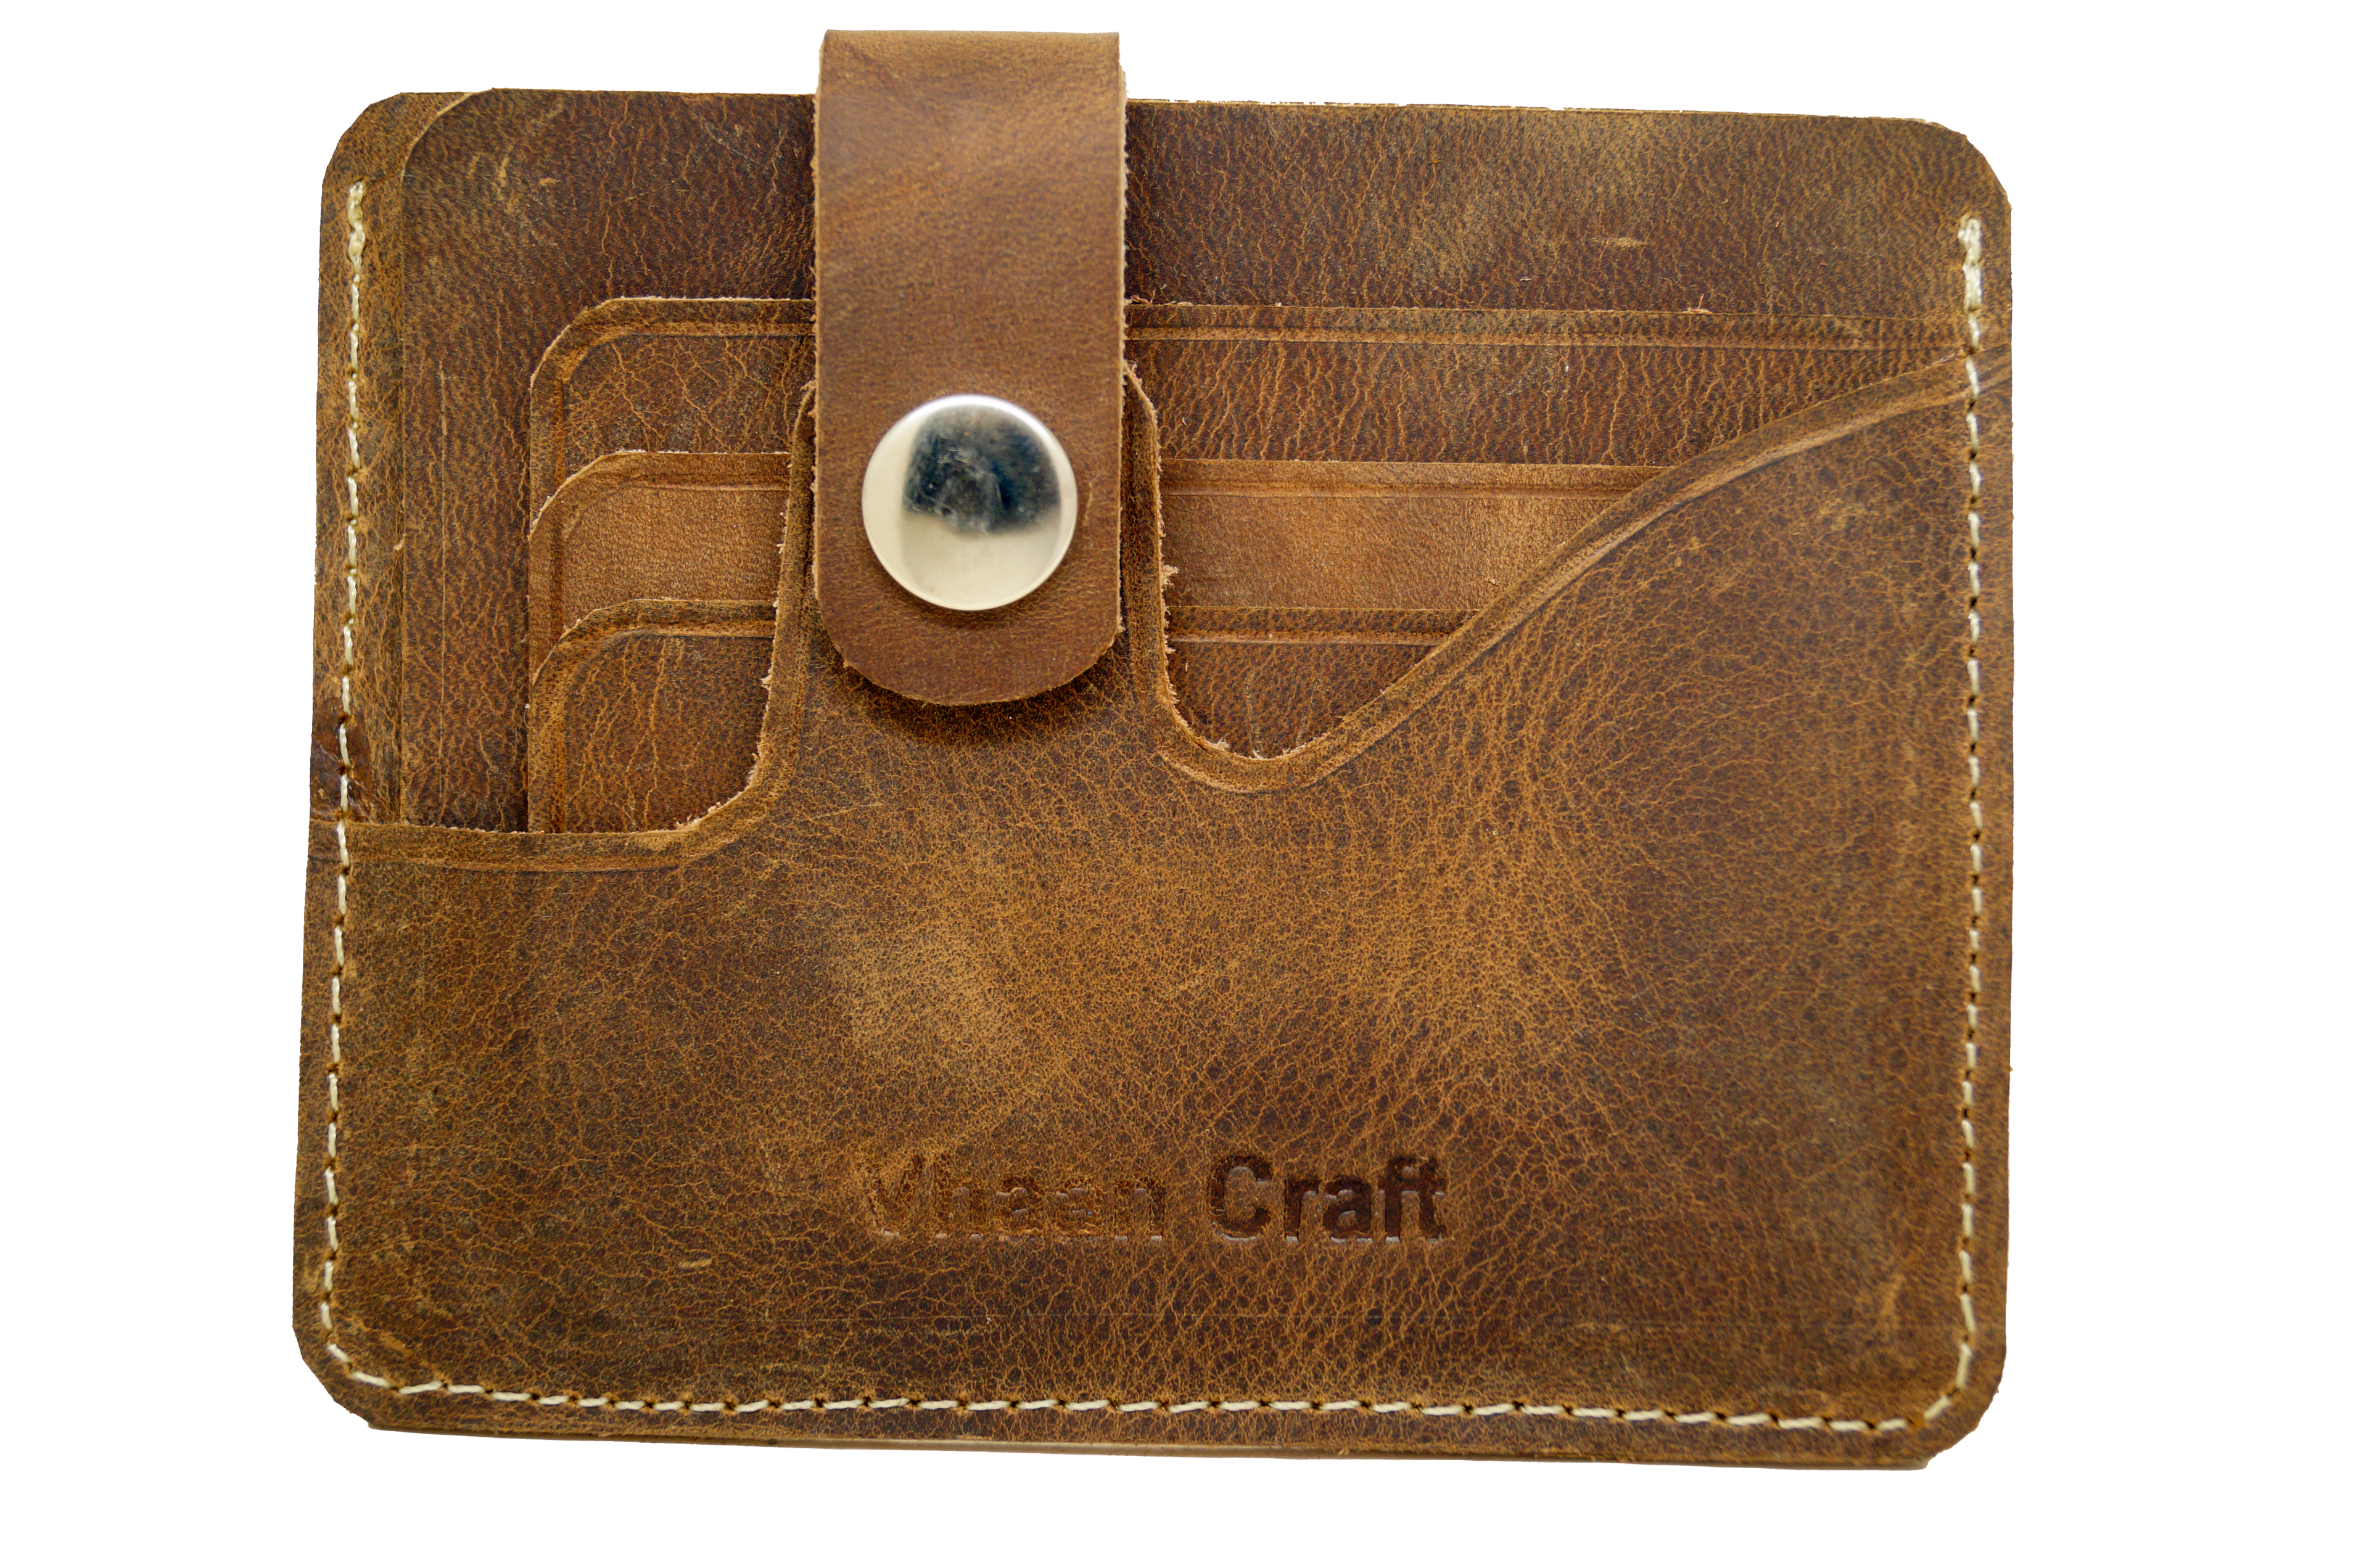 Vhaan's Heritage Oil Pulled Up Leather Card Holder - RAW shade